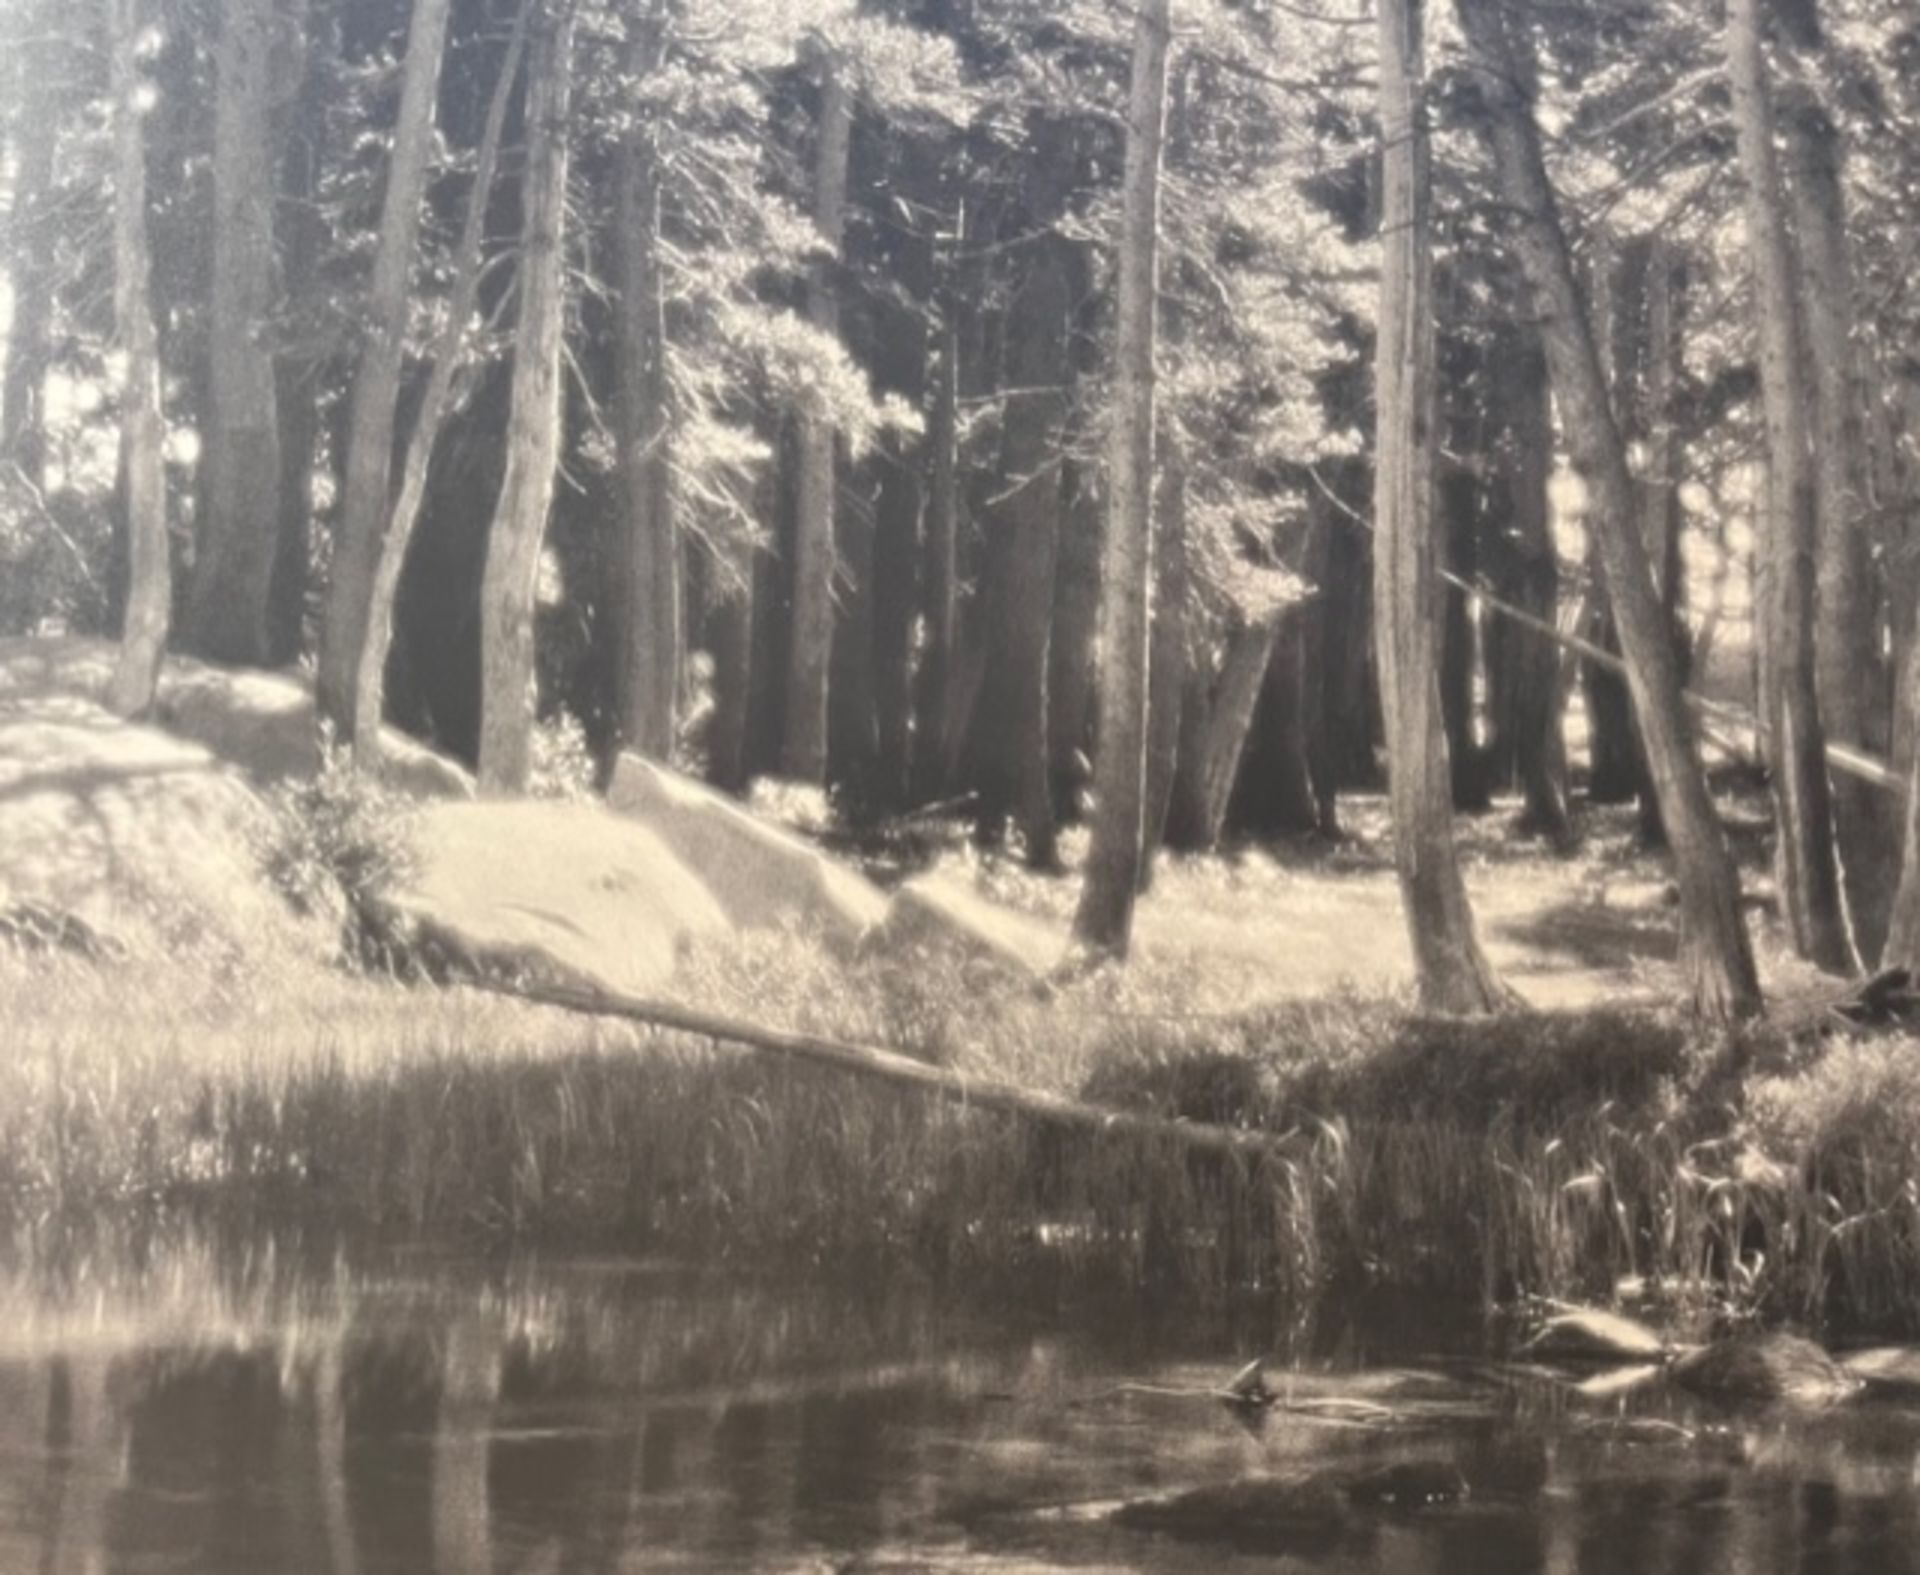 Ansel Adams "Forest and Stream" Print.